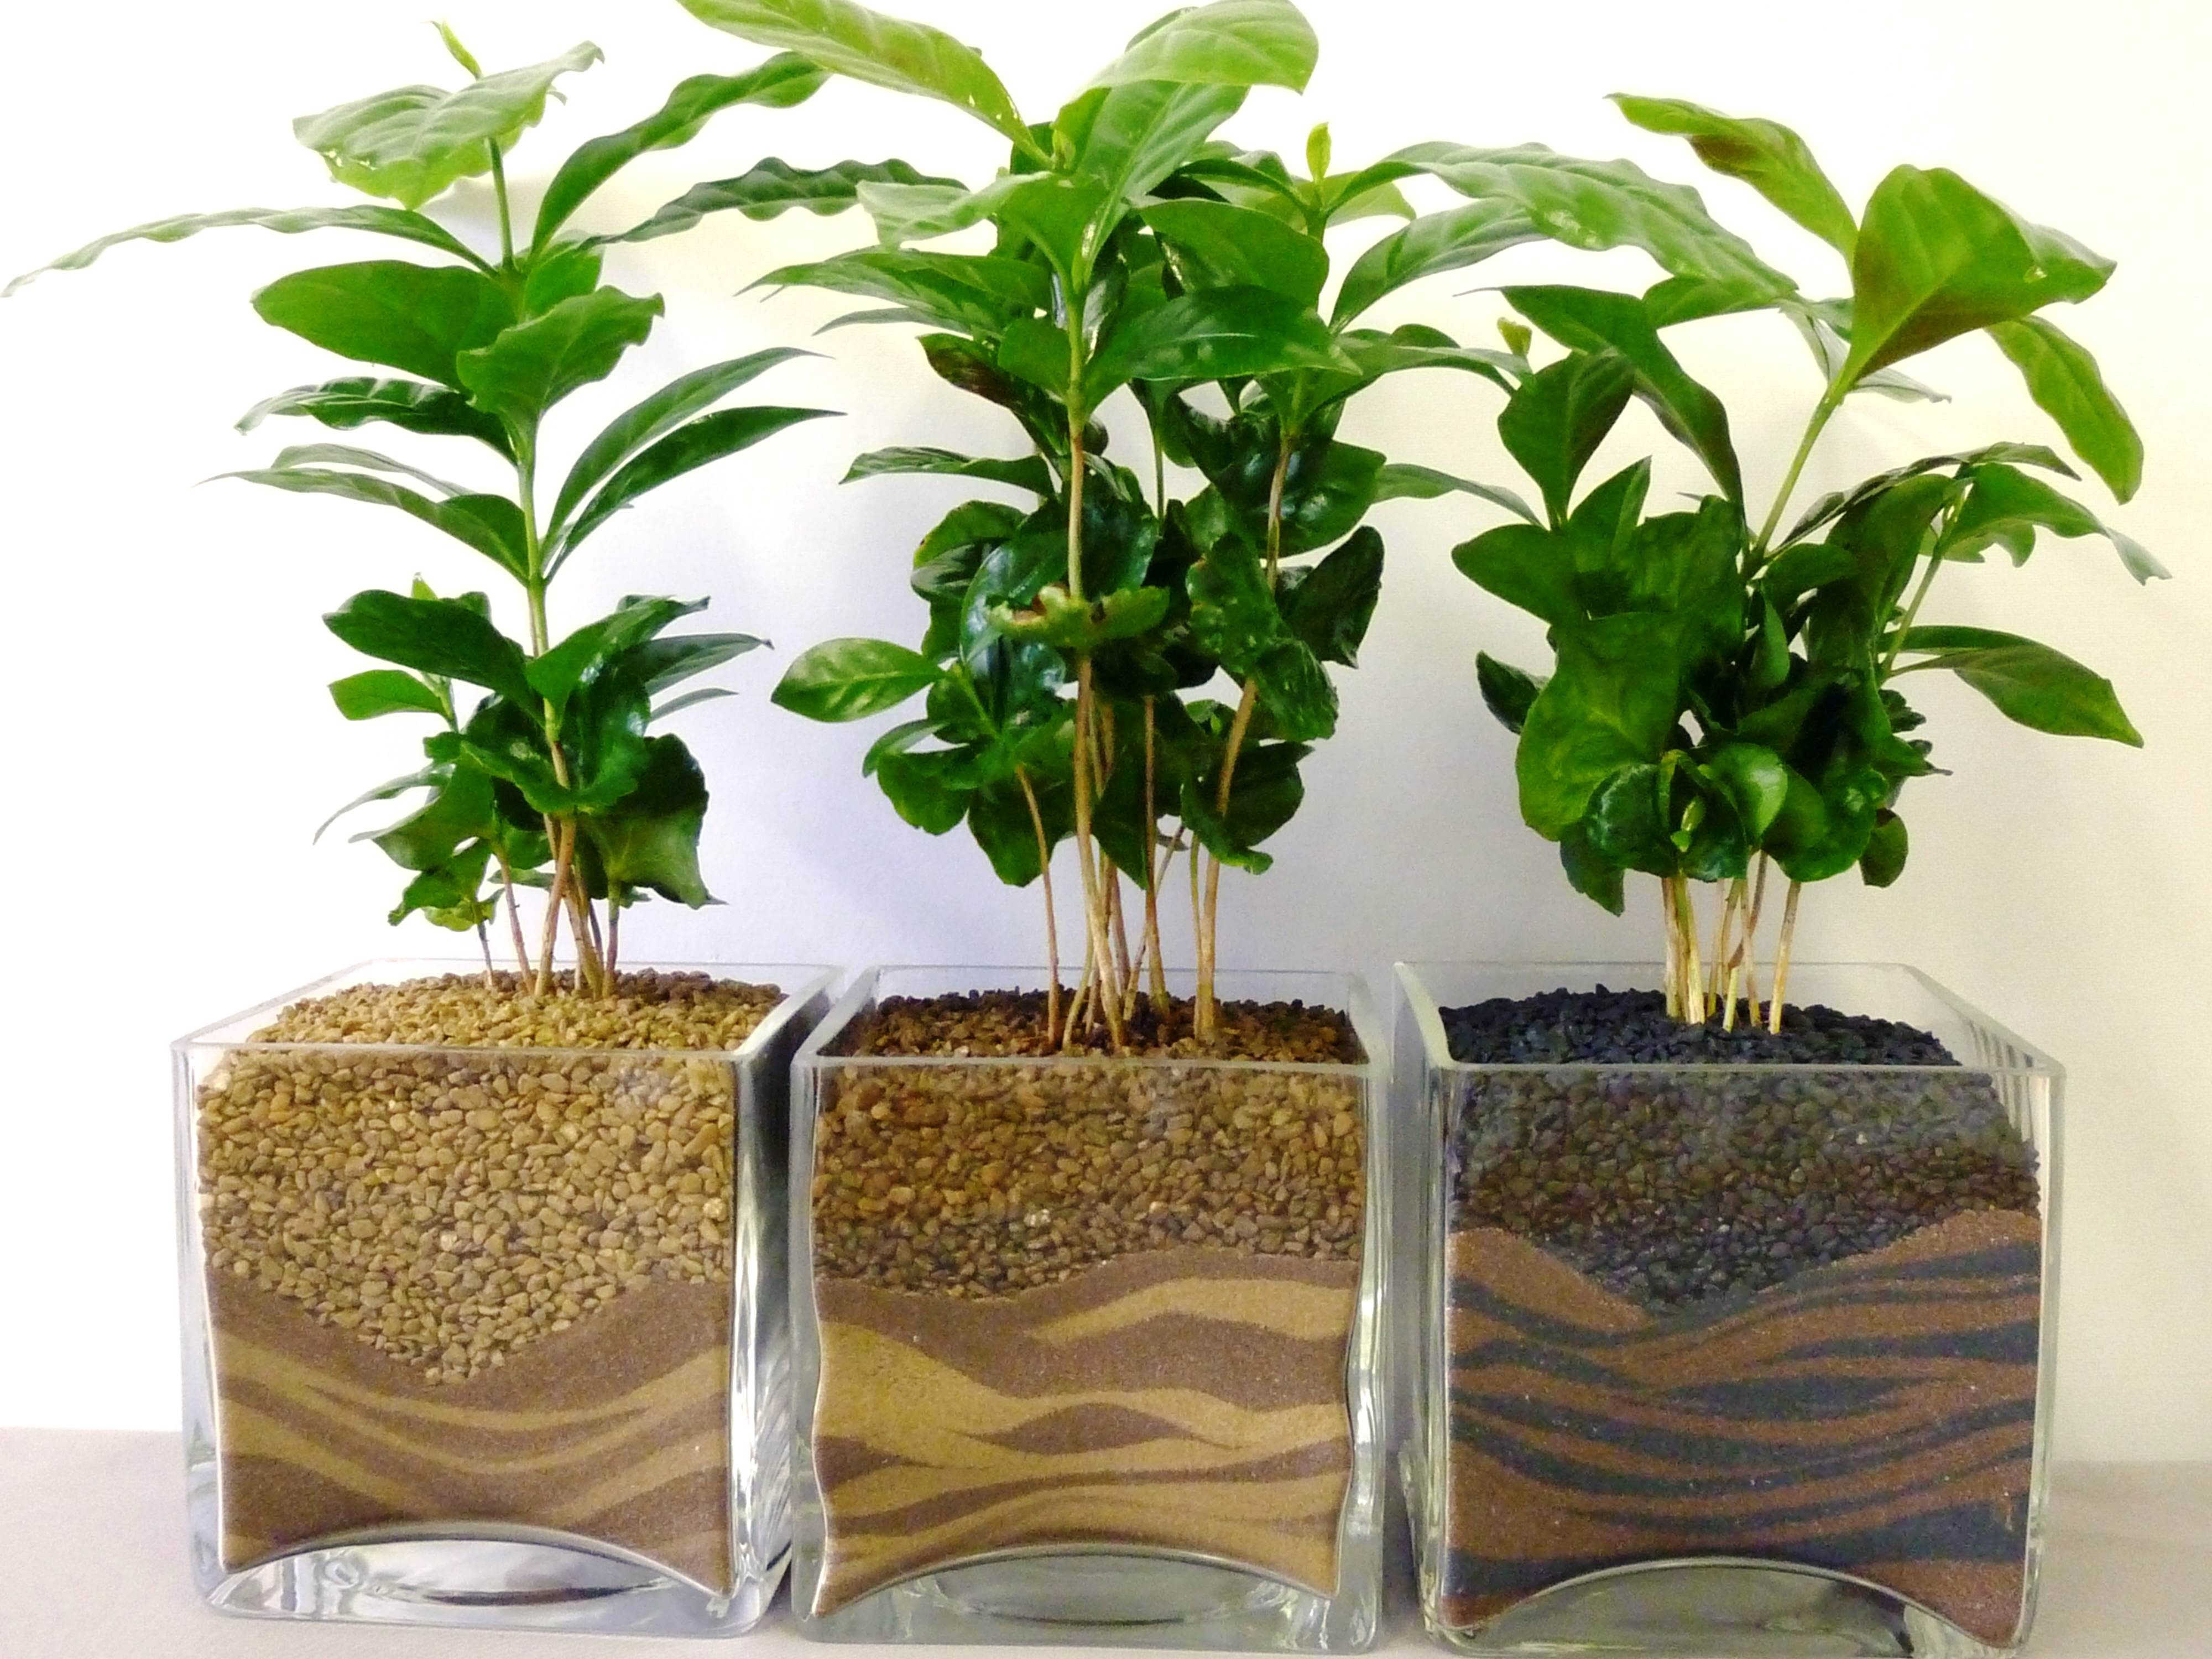 Inner Growth » Blog Archive » How to Take Care of your Coffea ...